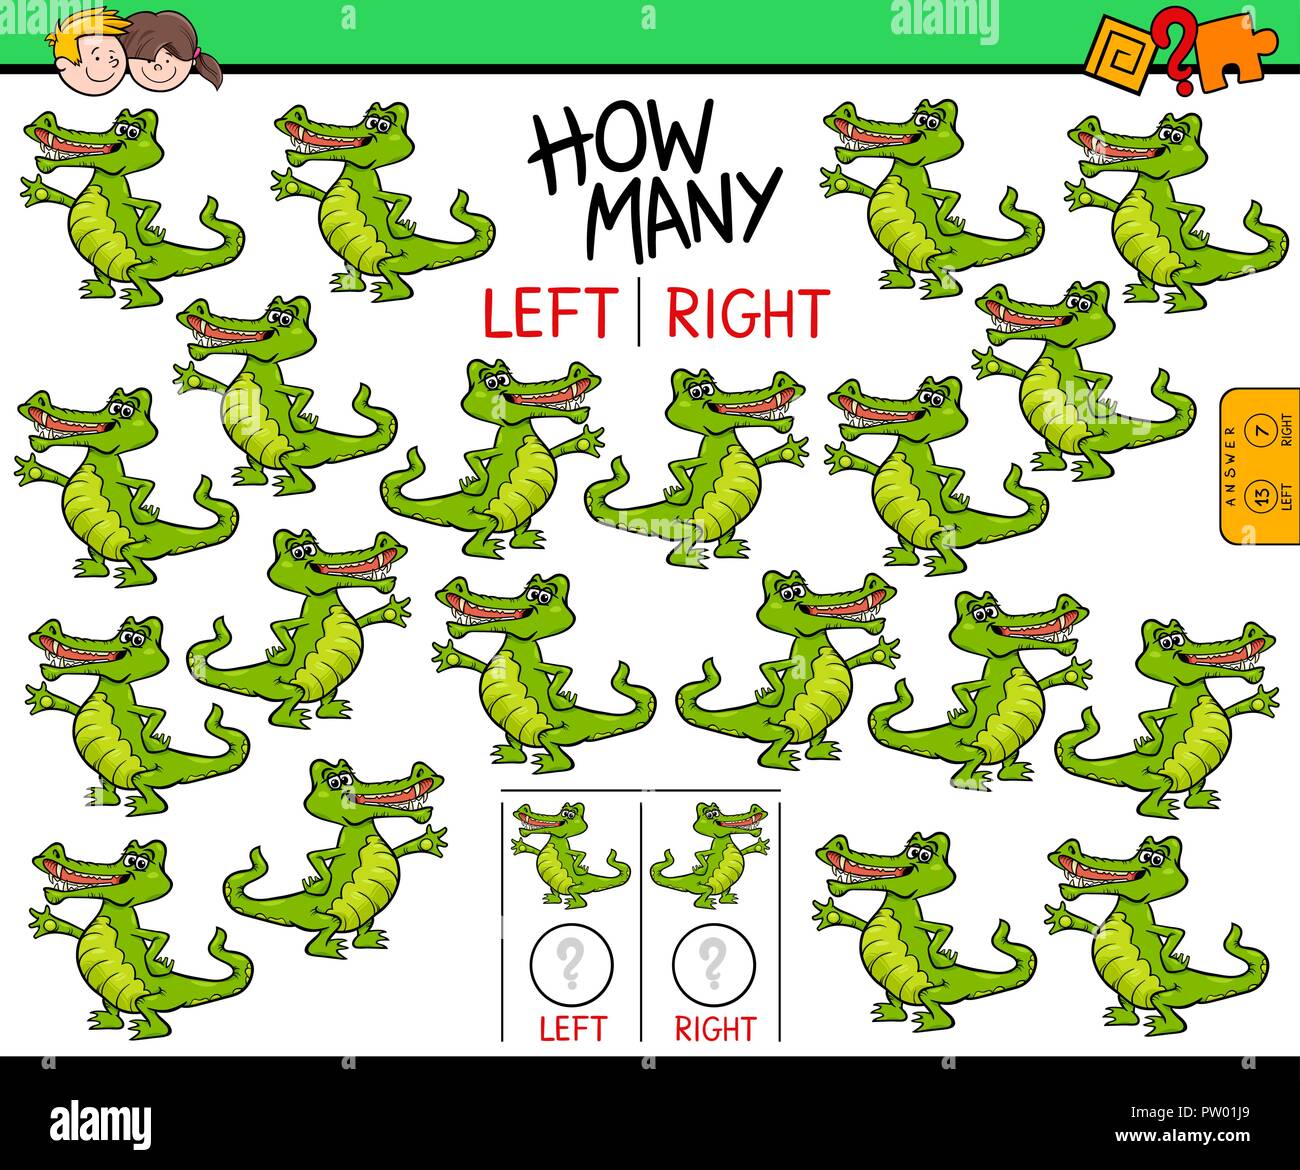 Cartoon Illustration of Educational Game of Counting Left and Right Oriented Pictures for Children with Funny Crocodile Character Stock Vector